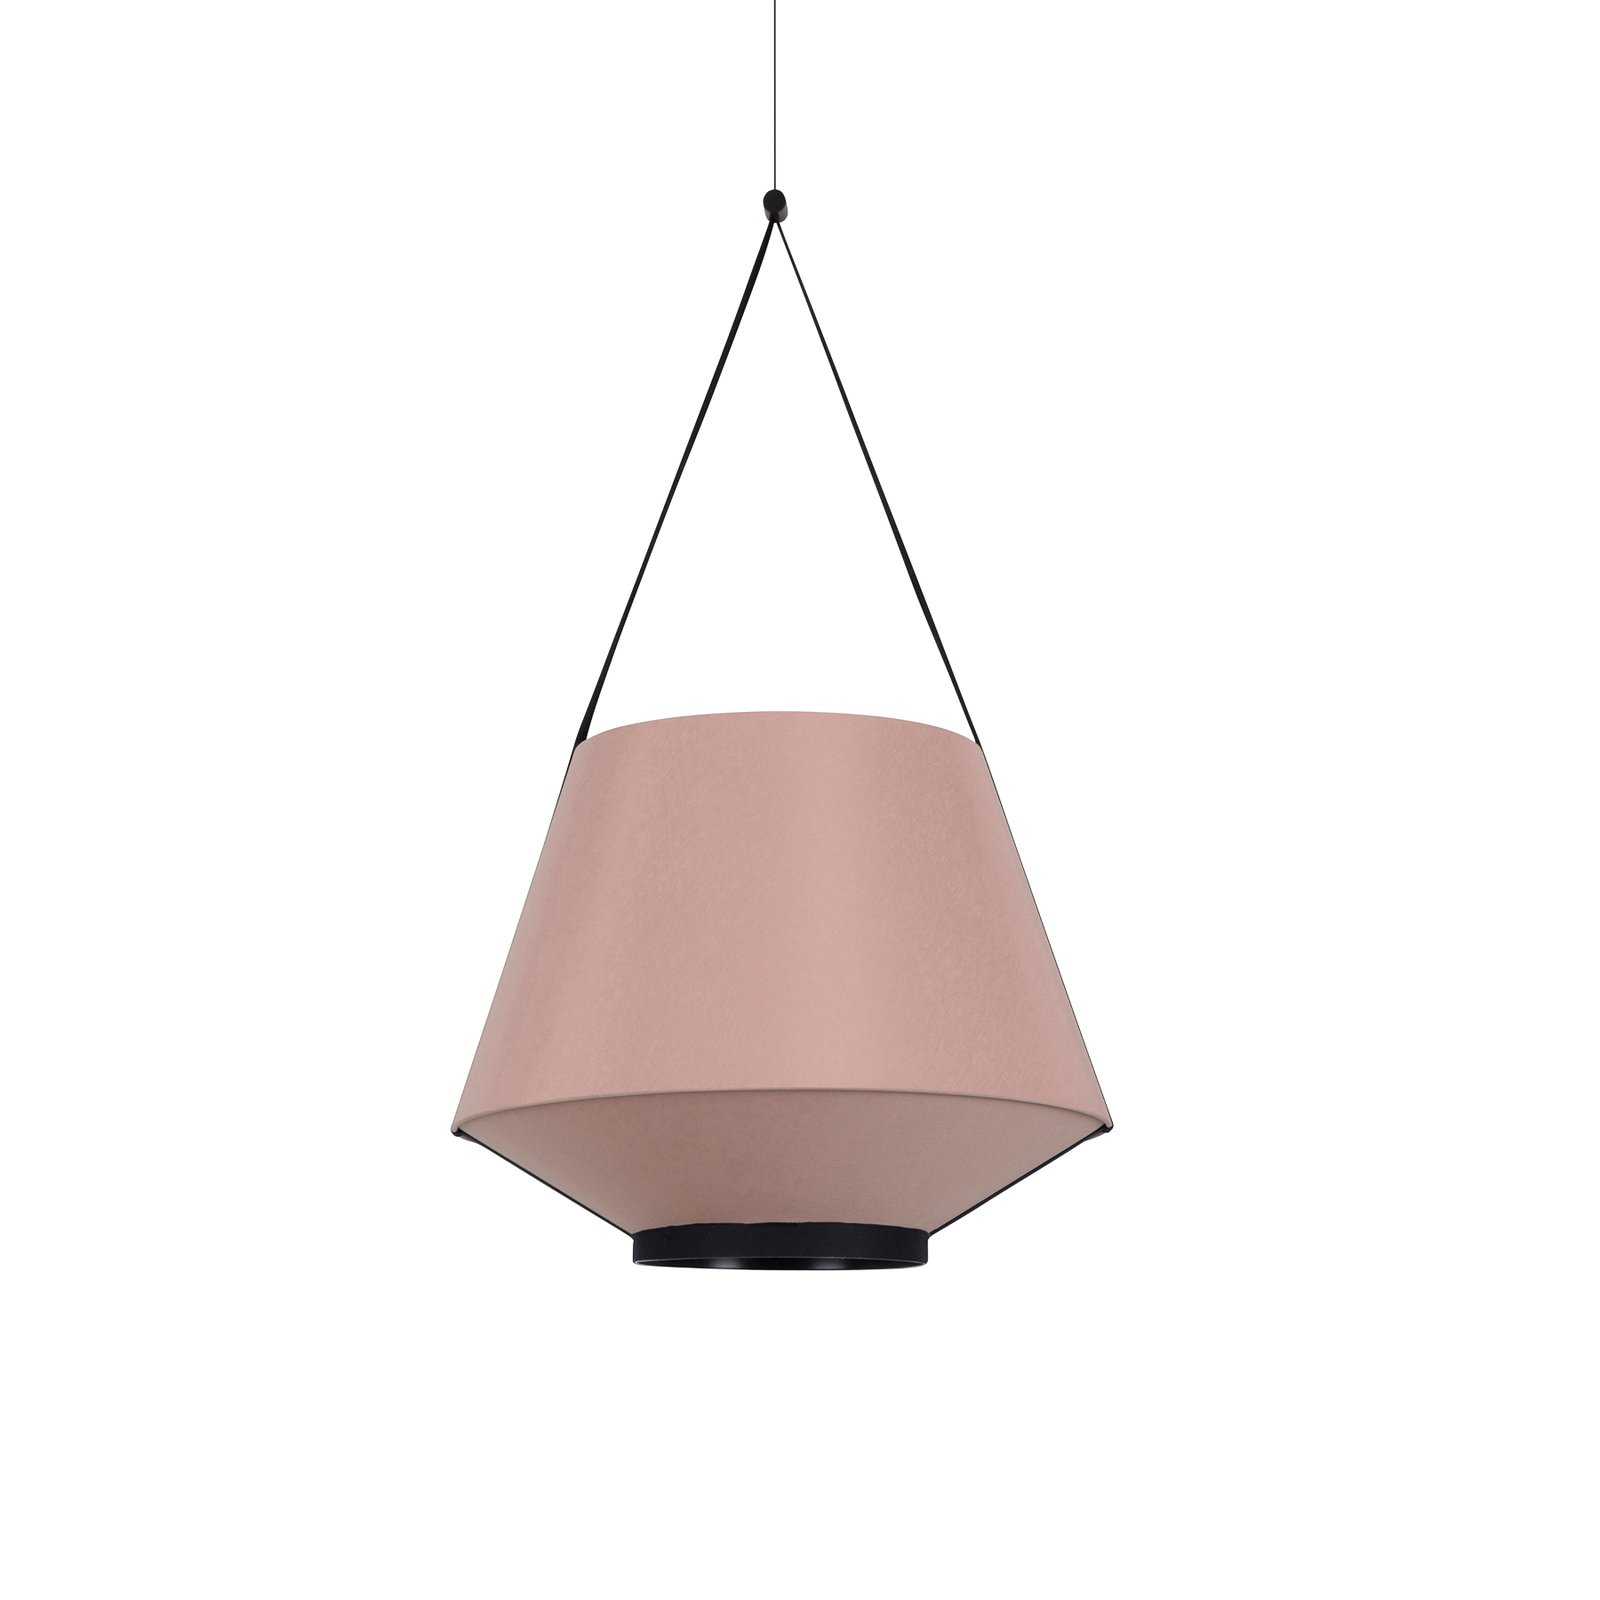 Forestier Carrie S hanglamp, nude